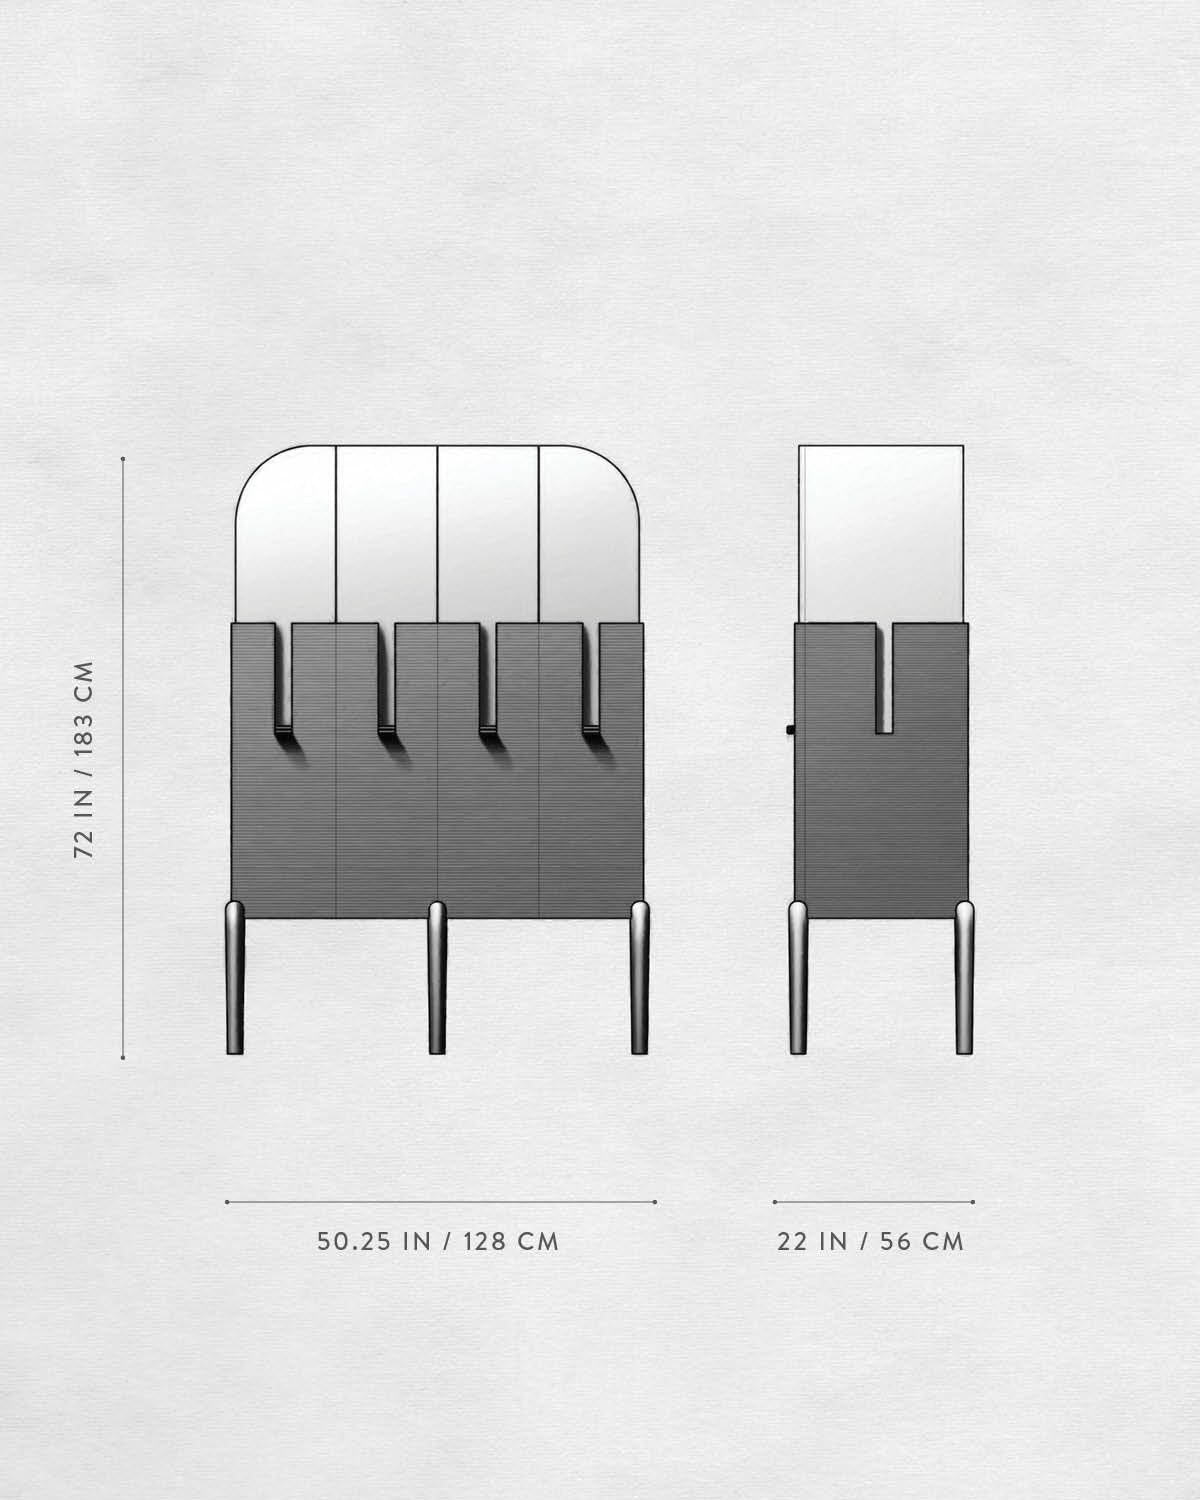 Technical drawing of INTERLUDE : CABINET VARIATION 02.